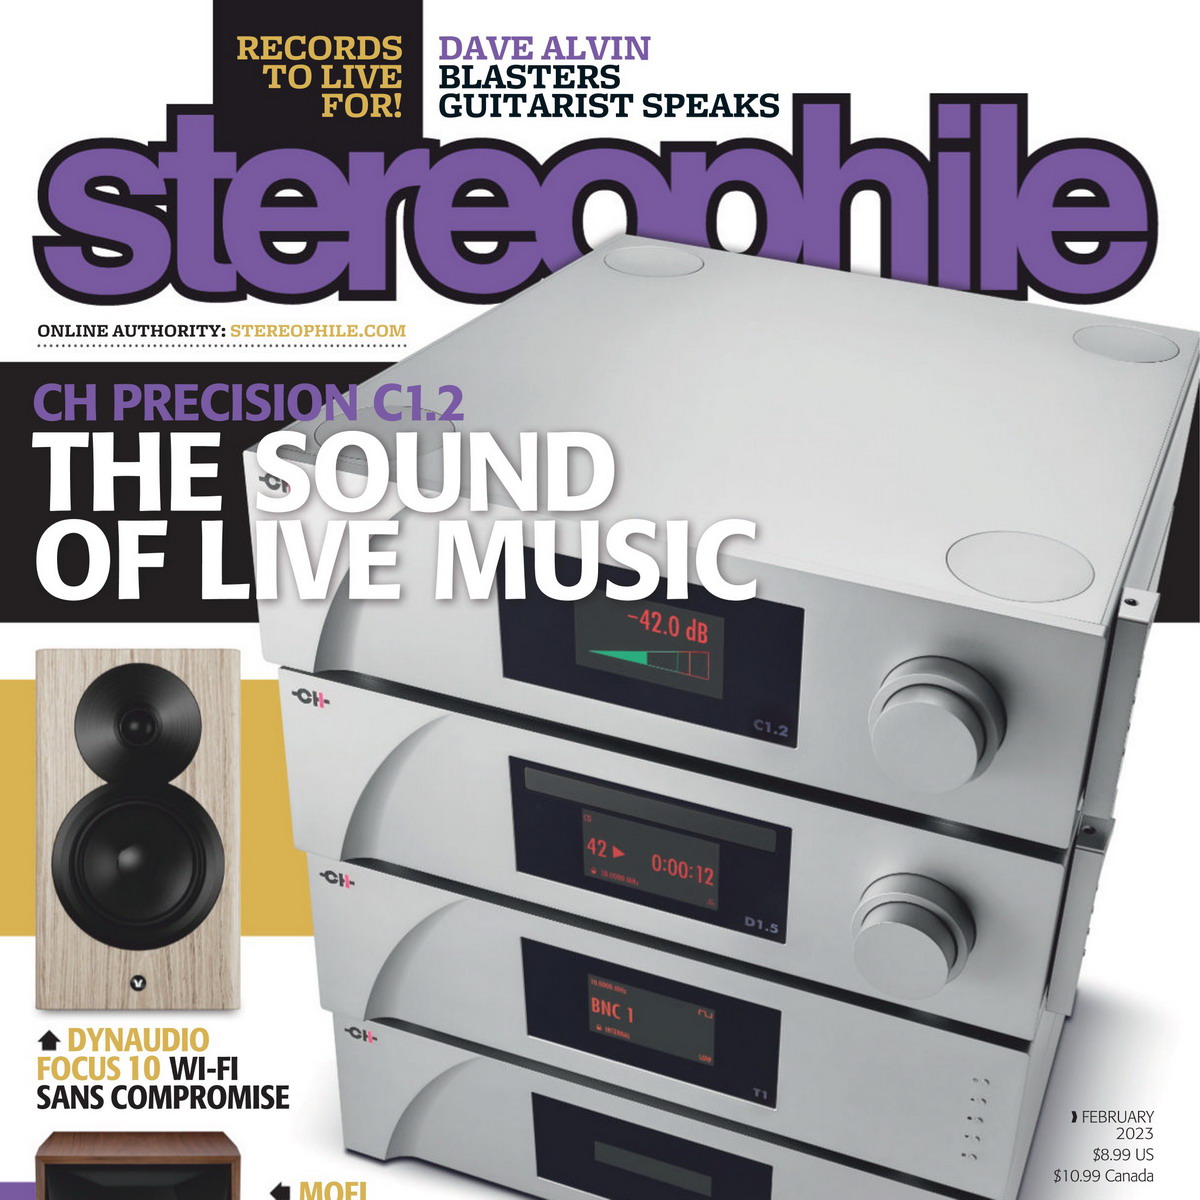 „Stereophile” Vol. 46, No. 02 ⸜ FEBRUARY 2023